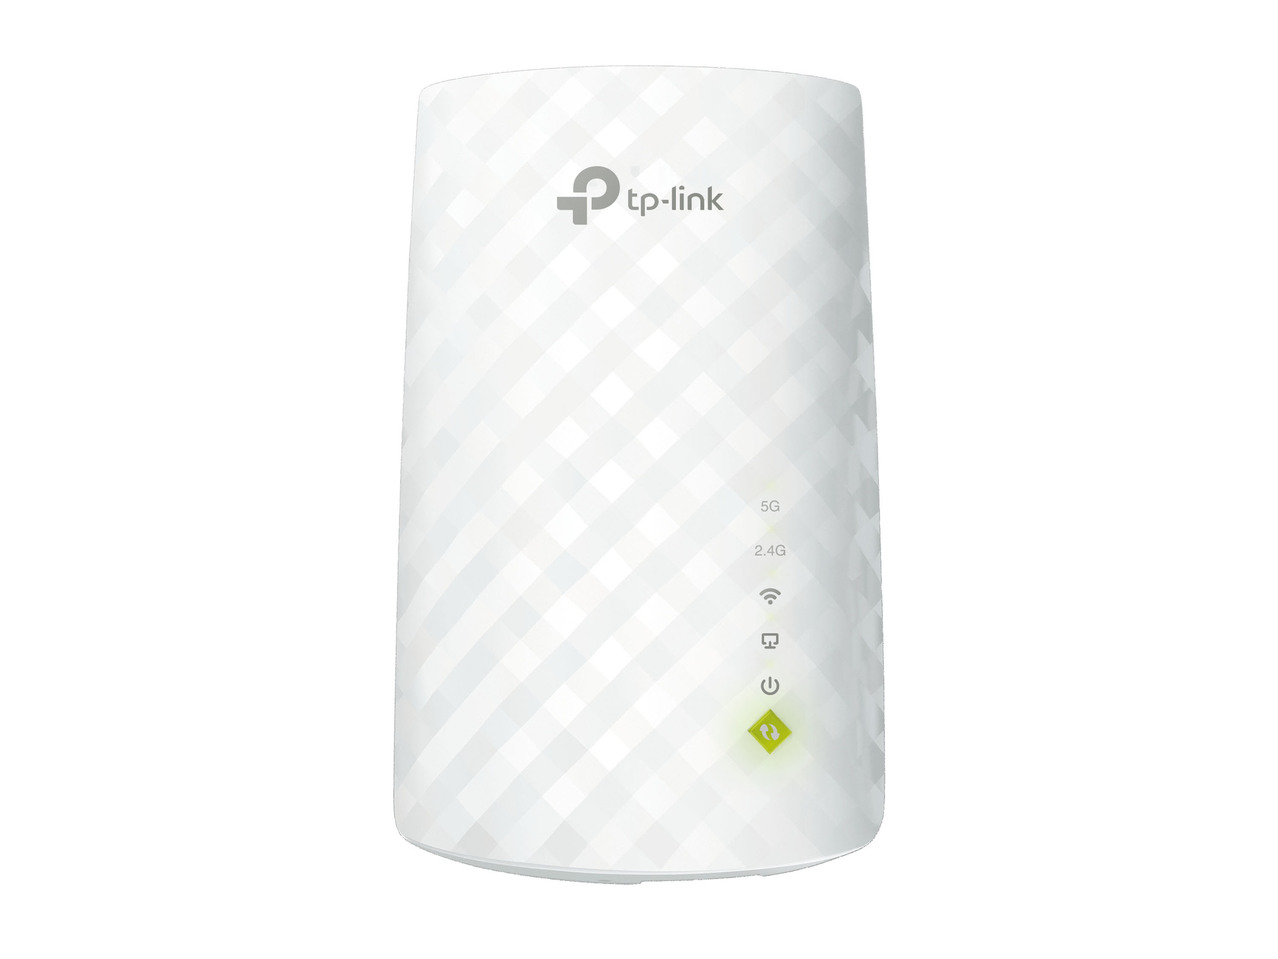 Ripetitore WLAN dual band RE200 "TP-Link"